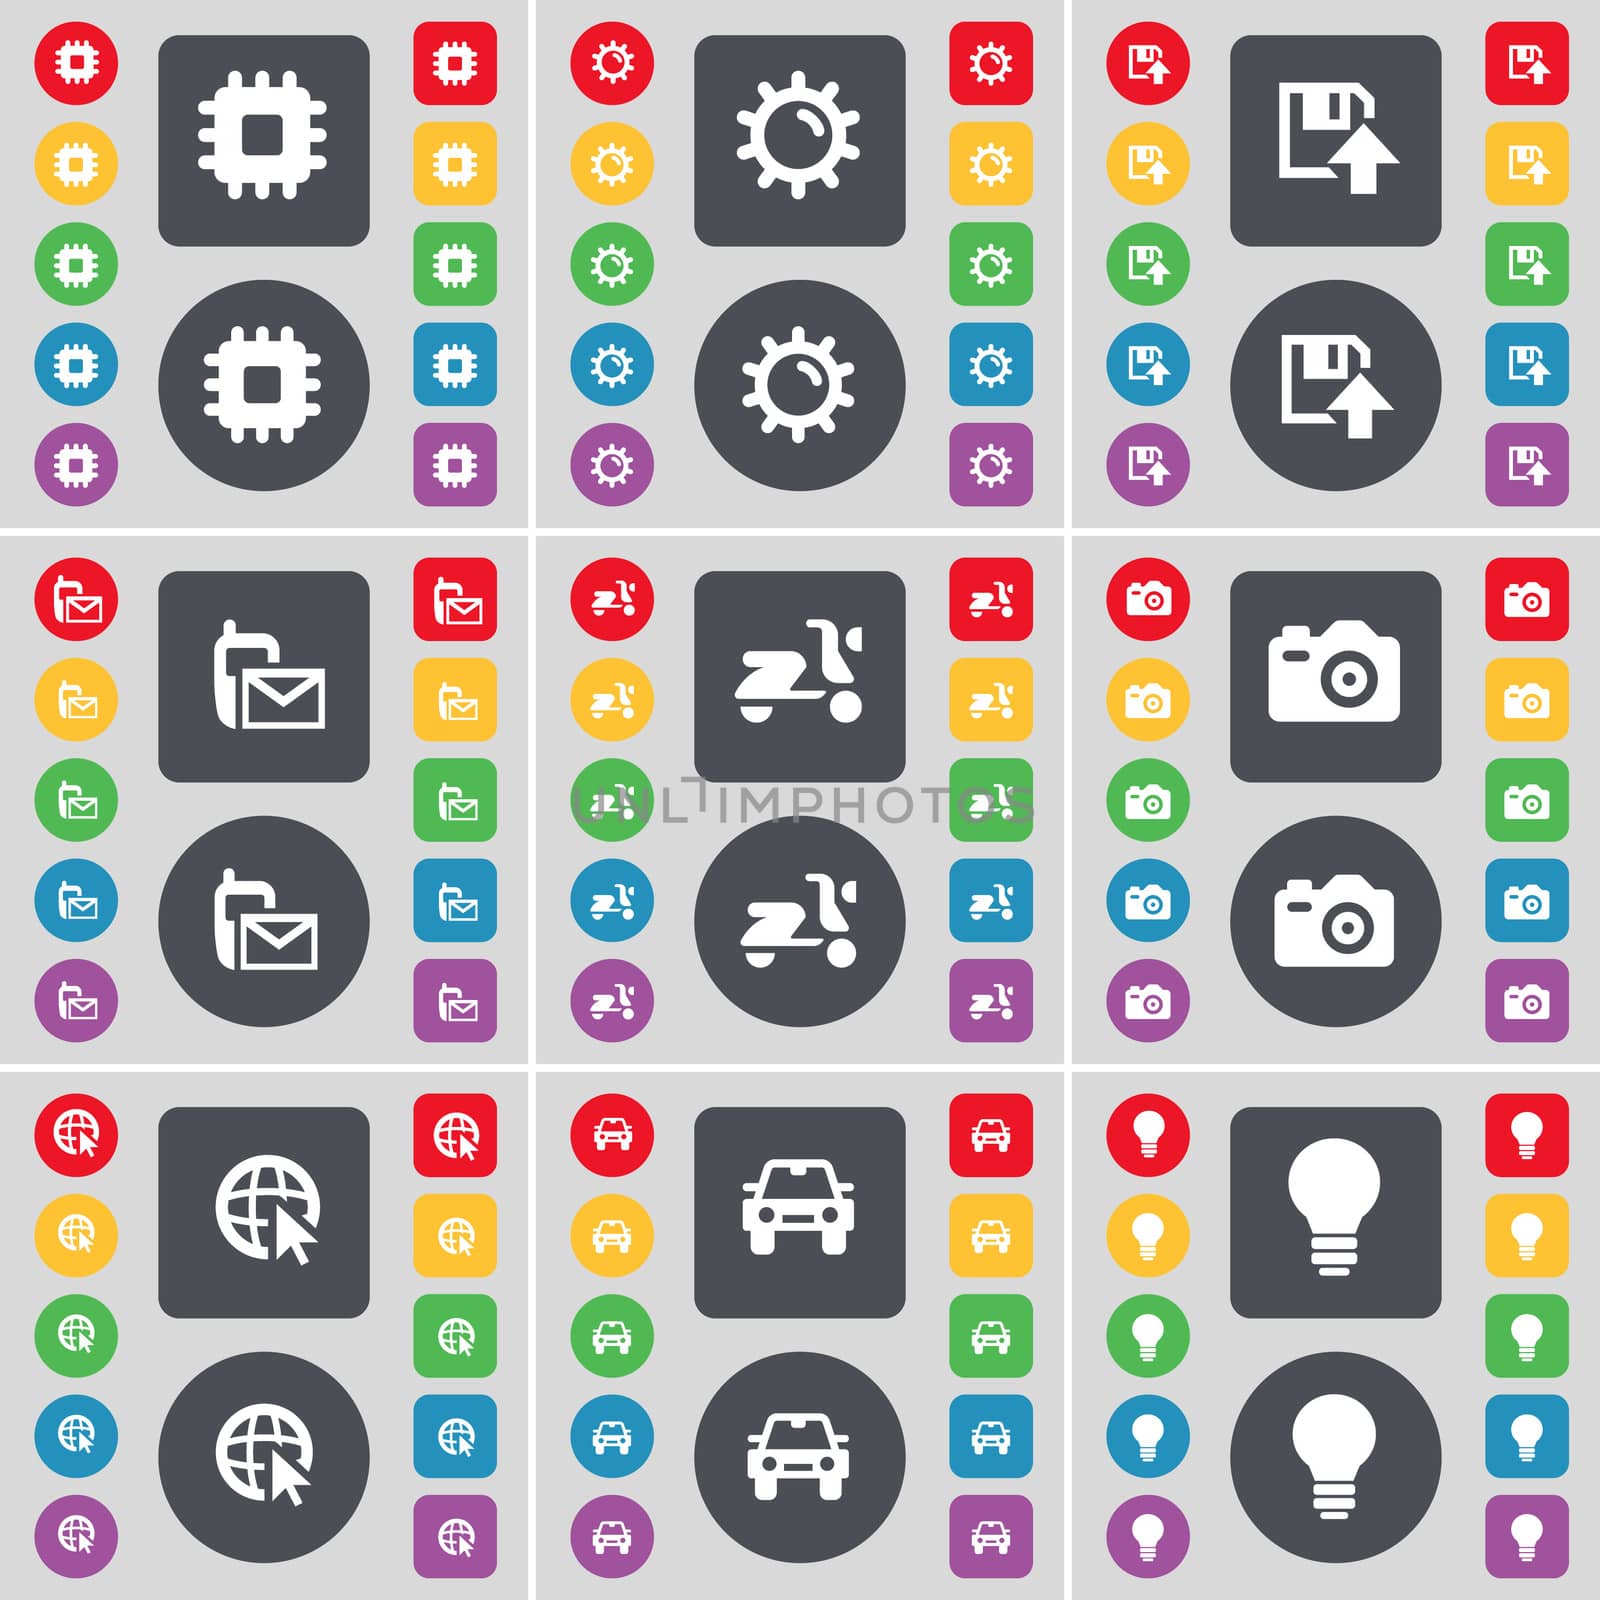 Processor, Gear, Floppy, SMS, Scooter, Camera, Web cursor, Car, Light bulb icon symbol. A large set of flat, colored buttons for your design. illustration